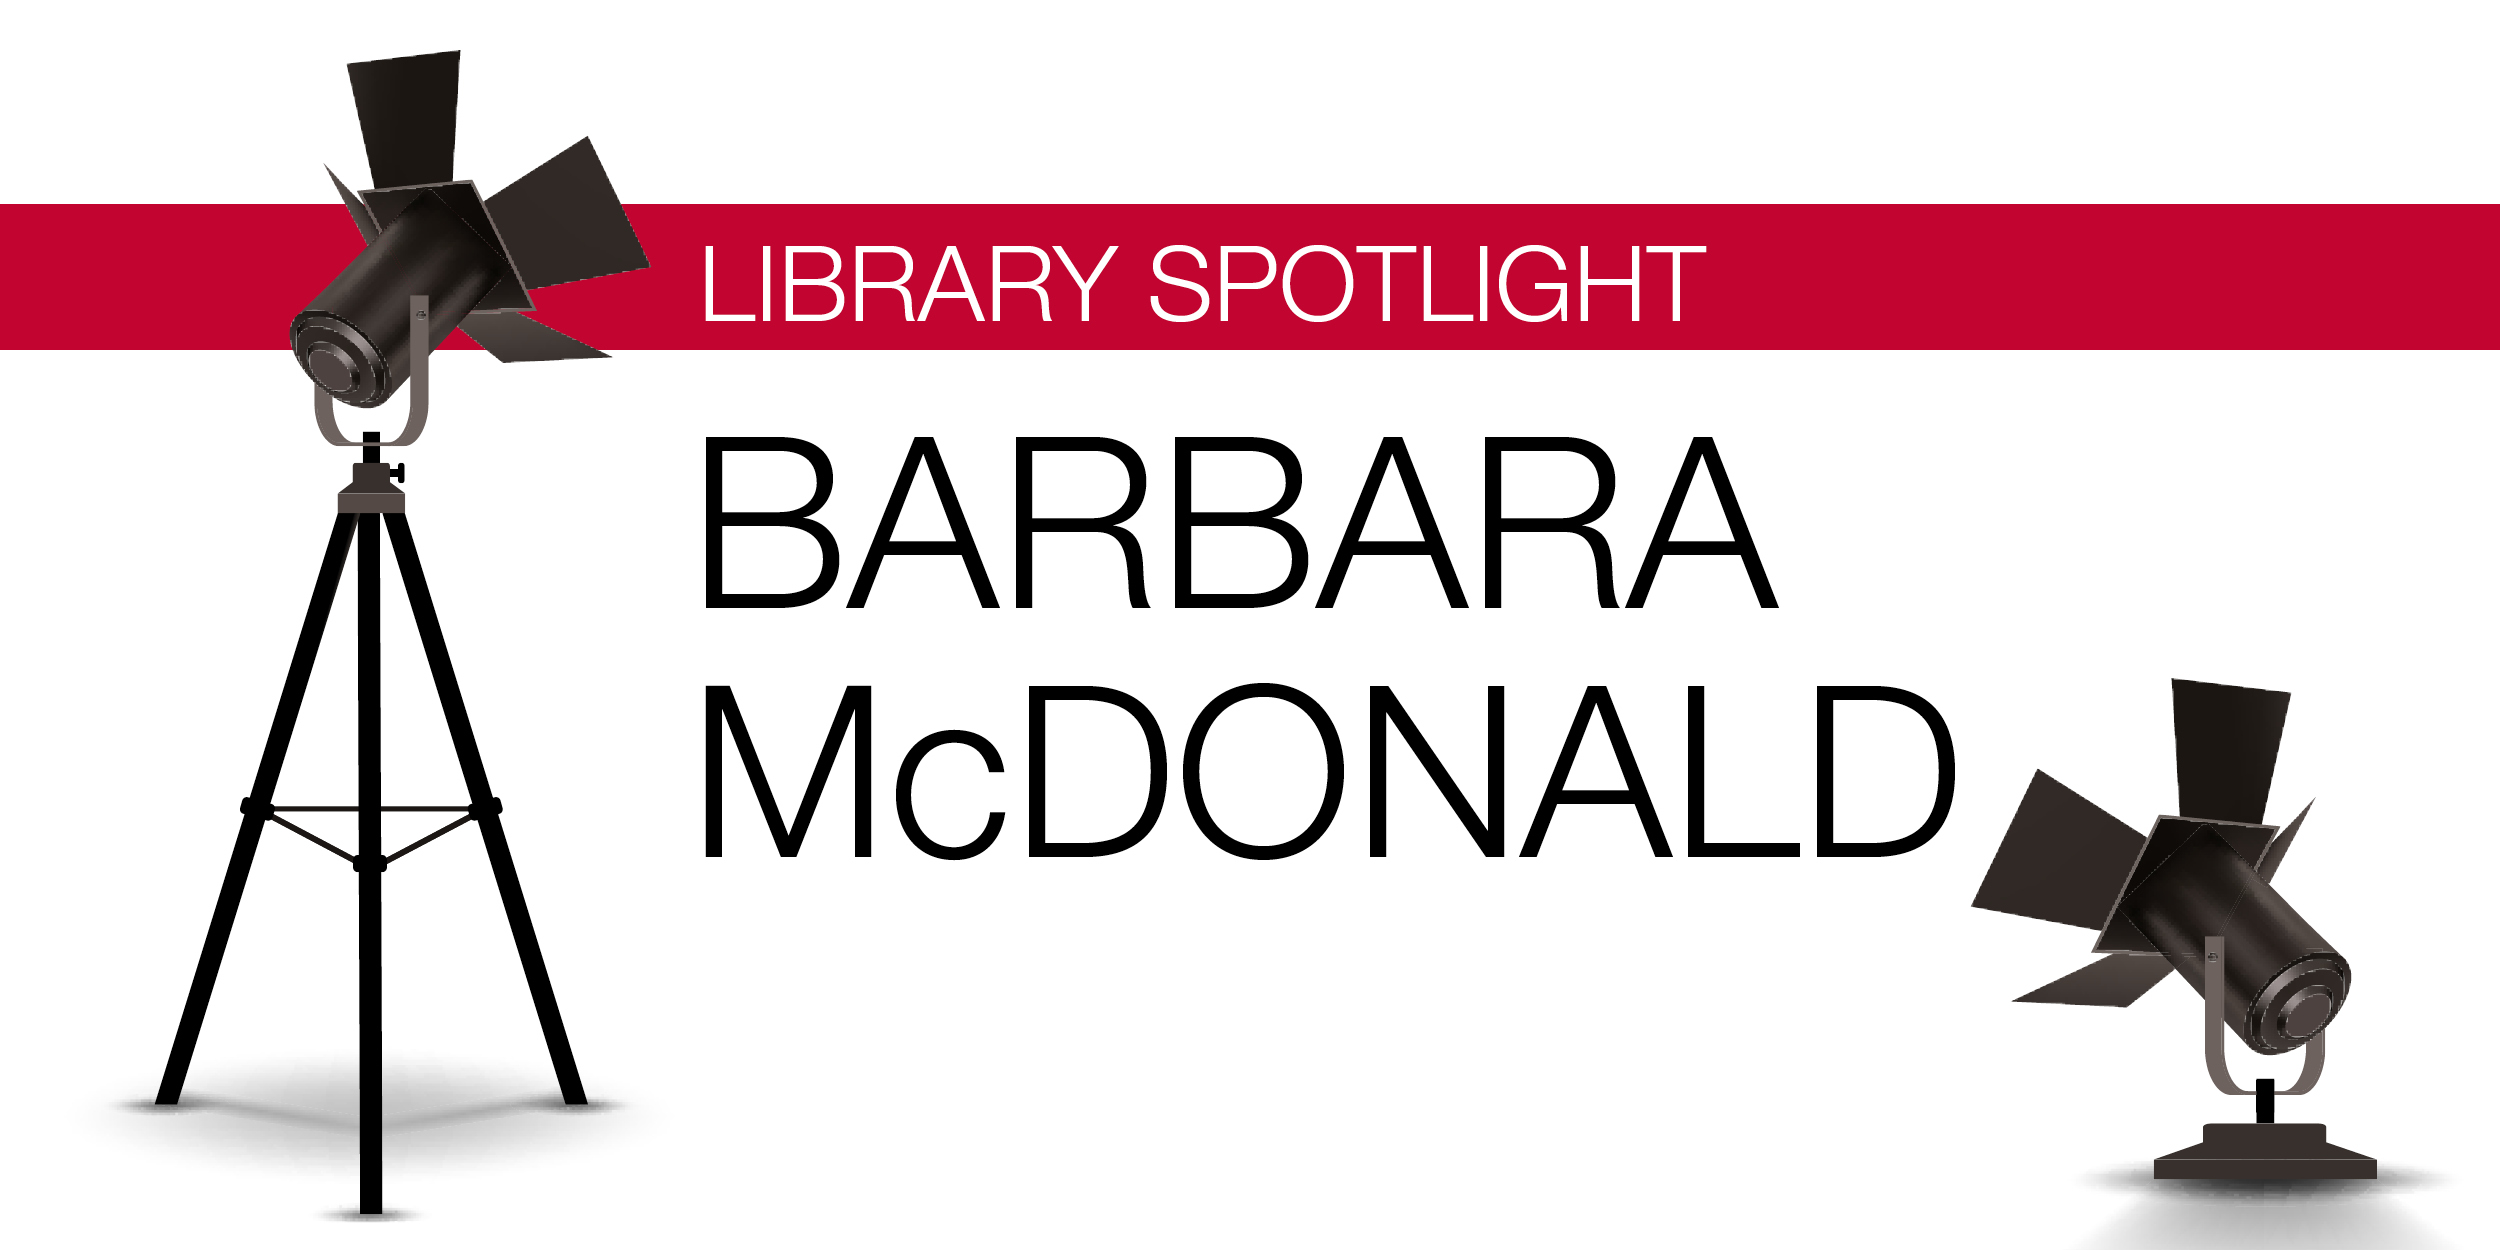 Graphic of two spotlights directed towards text that reads "LIBRARY SPOTLIGHT. BARBARA MCDONALD."